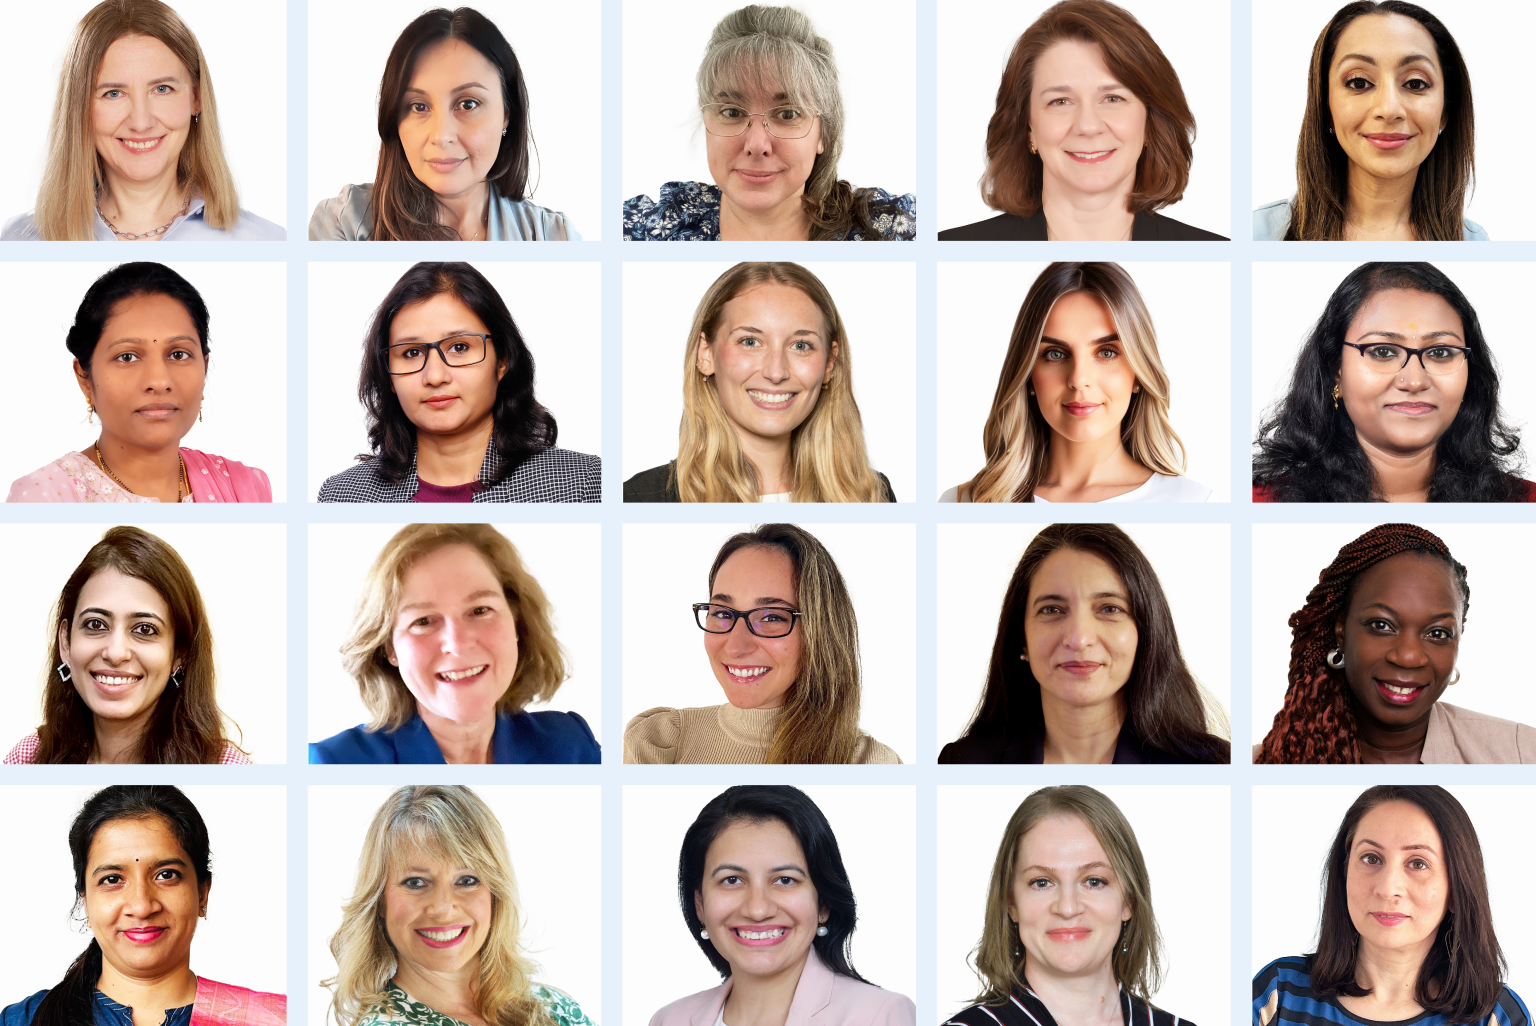 Women in Technology: Inclusion inspires innovation Image